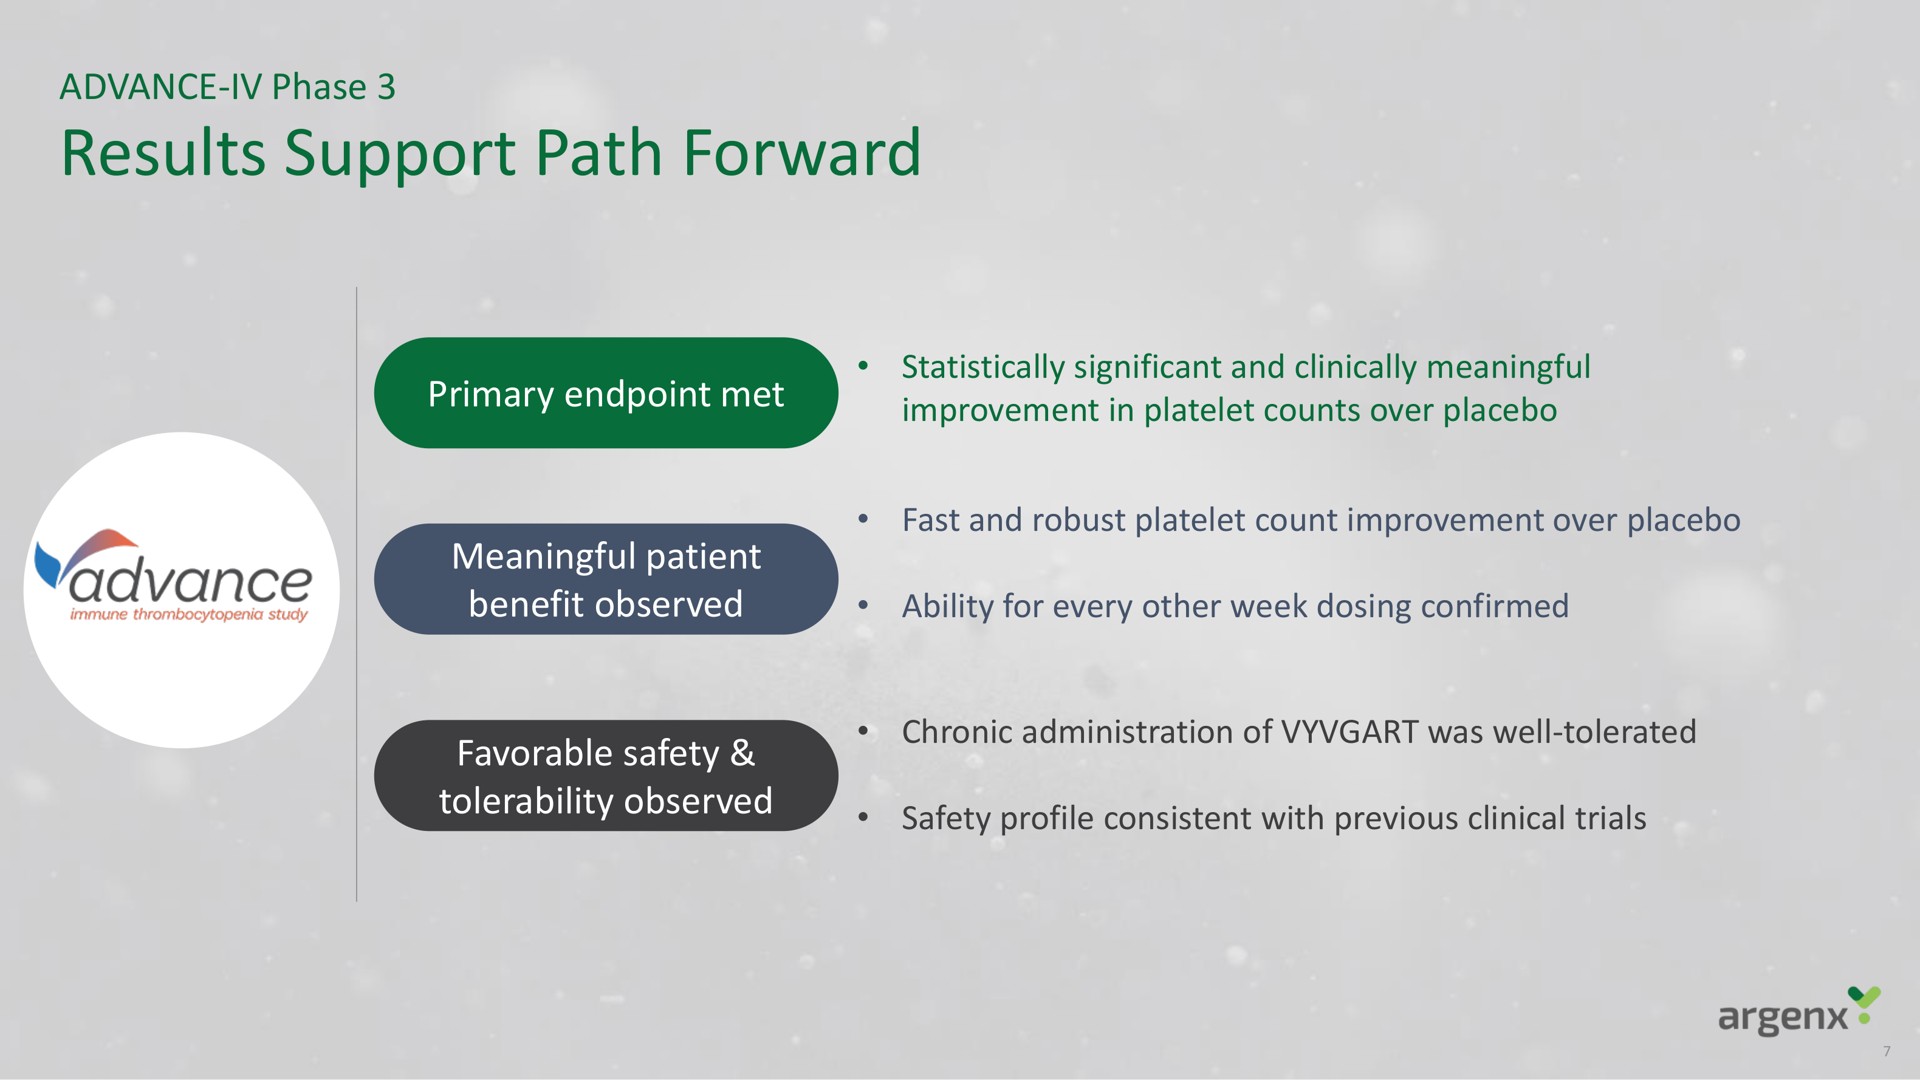 results support path forward | argenx SE